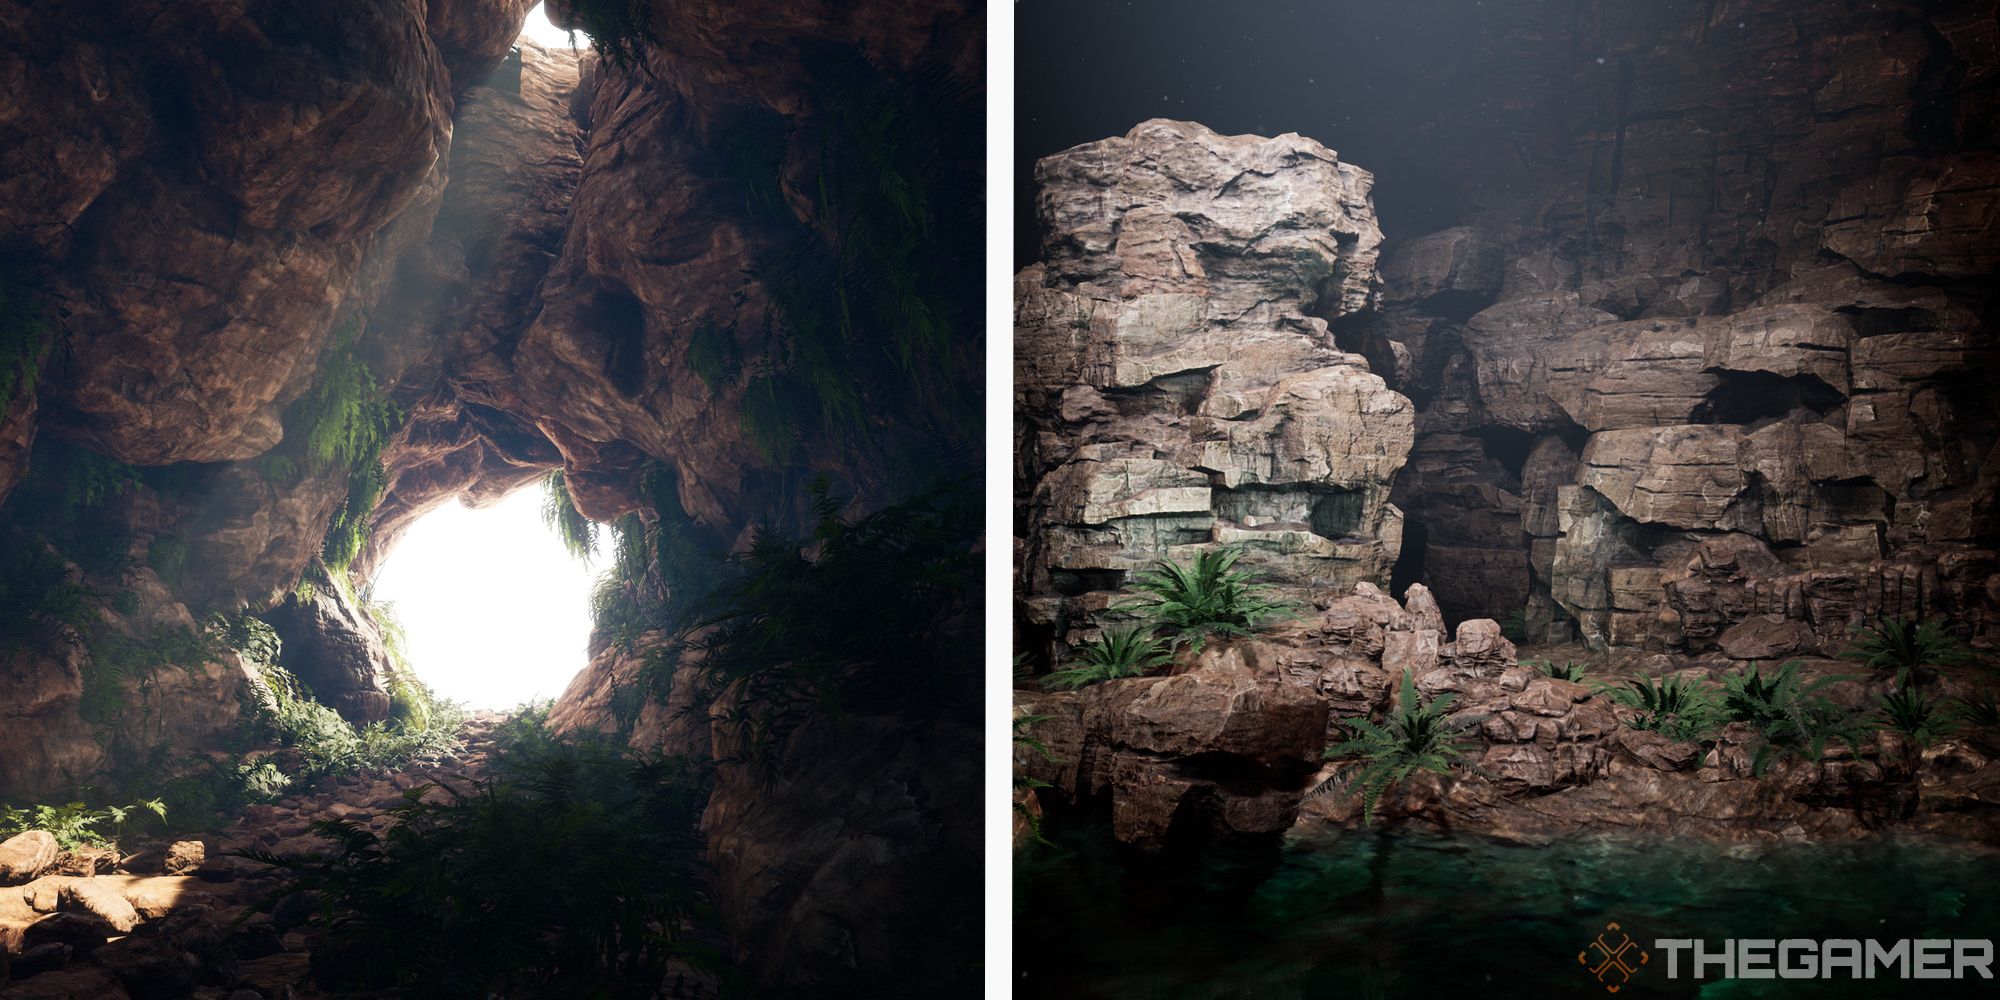 images of two caves next to each other